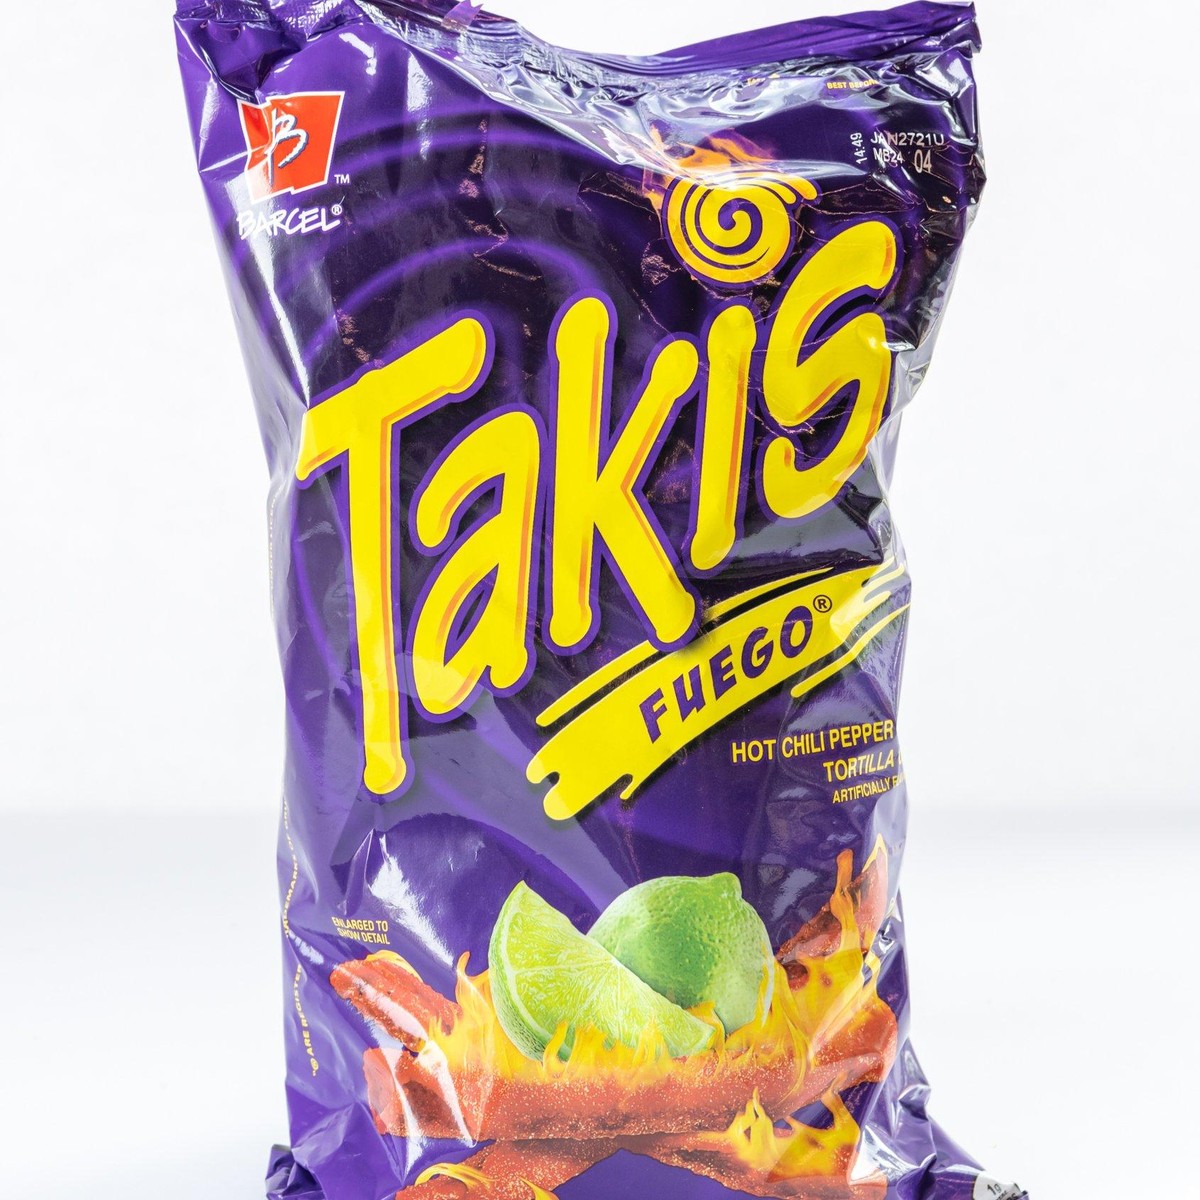 Takis Fuego Hot Chili Pepper & Lime Flavored Rolled Tortilla Minis 9.88 oz  (Pack of 3)